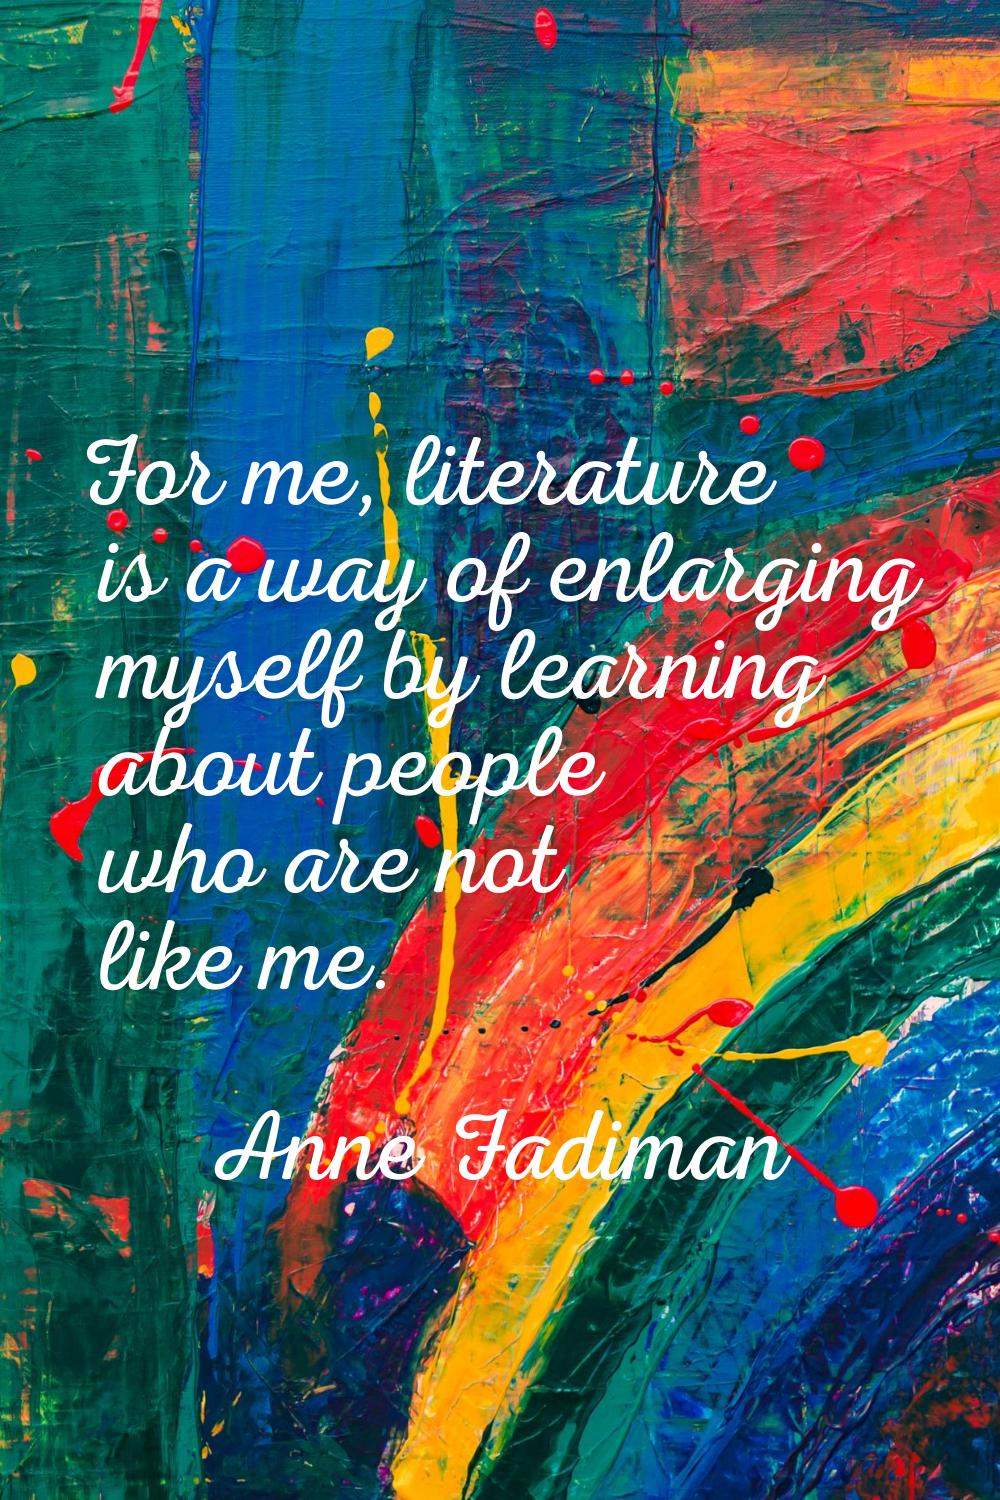 For me, literature is a way of enlarging myself by learning about people who are not like me.